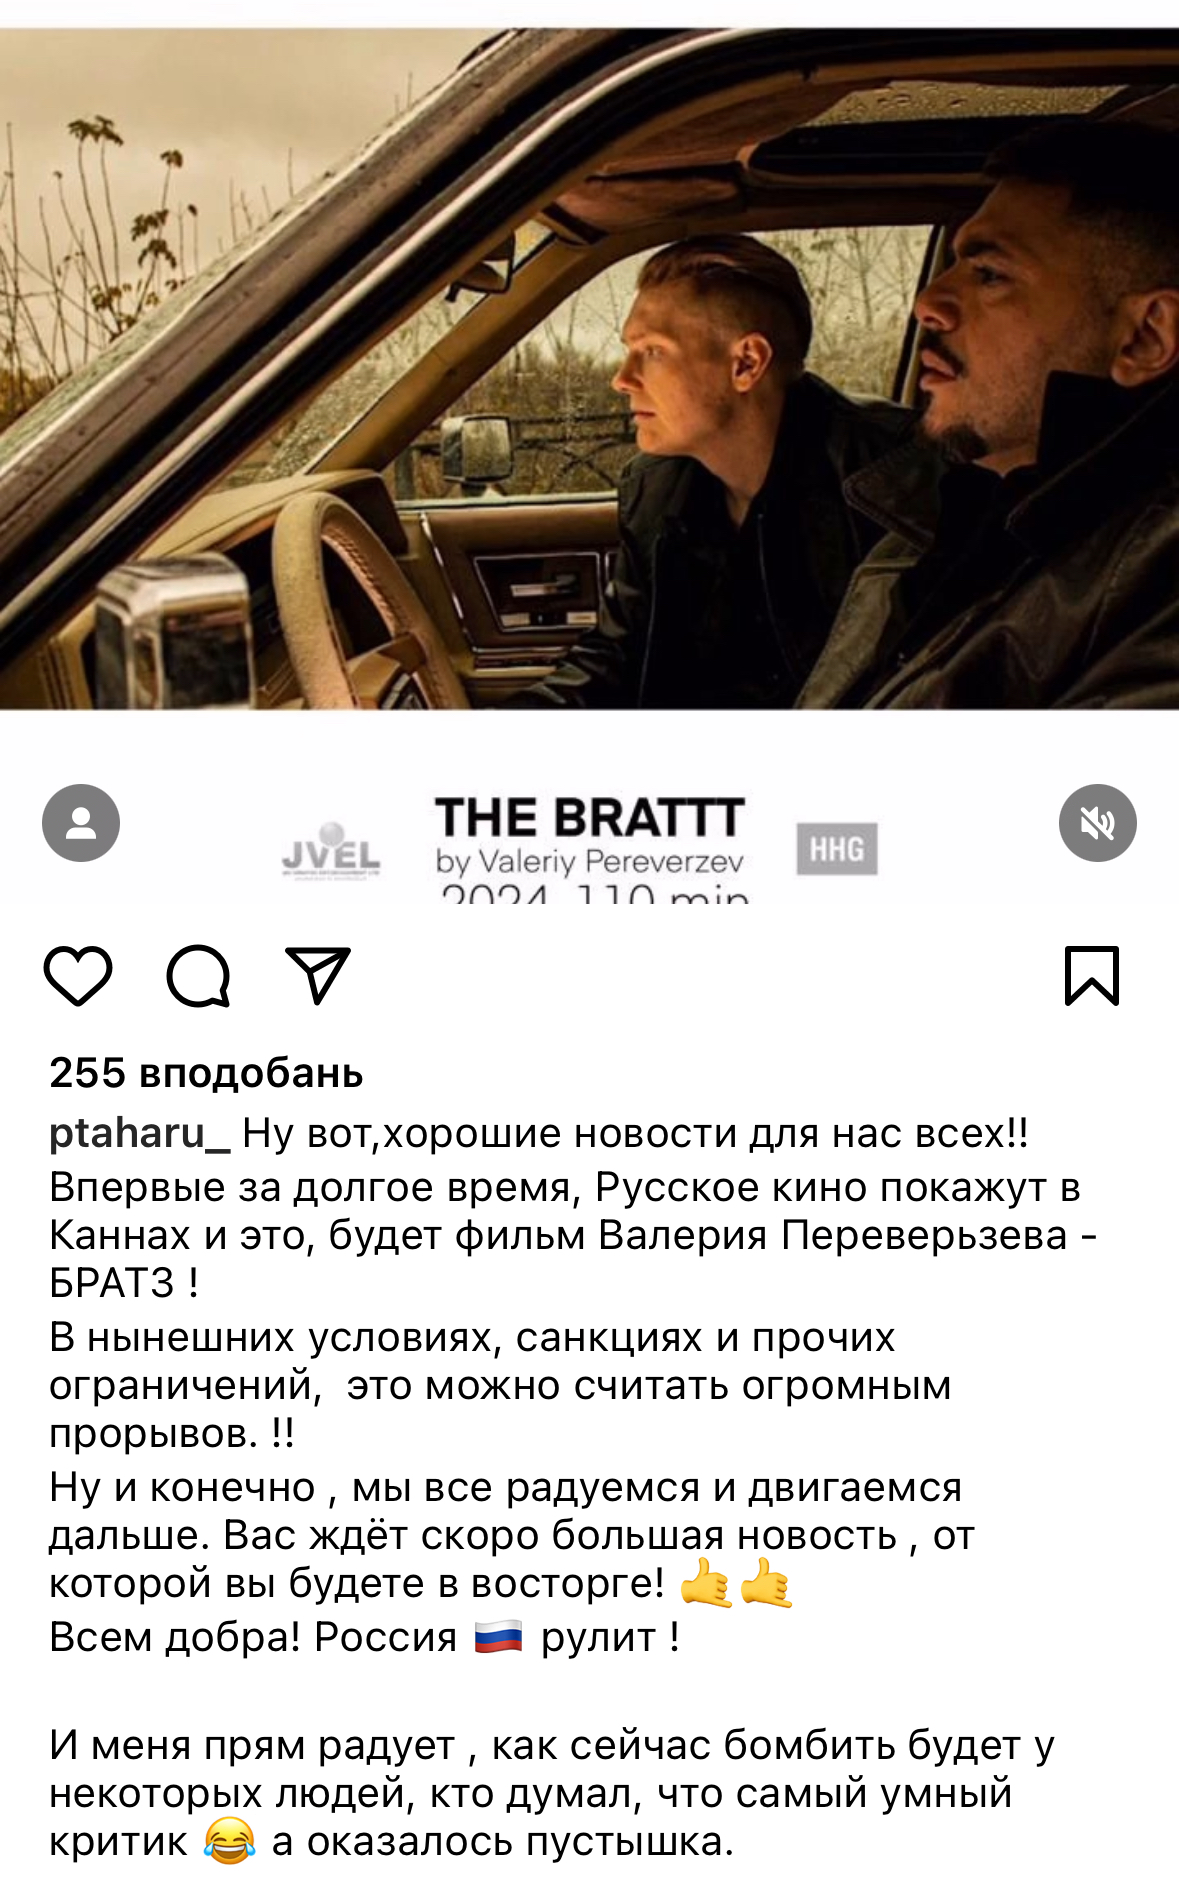 The Russian film ''Brat-3'' starring Putinist rapper Ptaha, who in 2019 called for the capture of all Ukraine, will be screened in Cannes